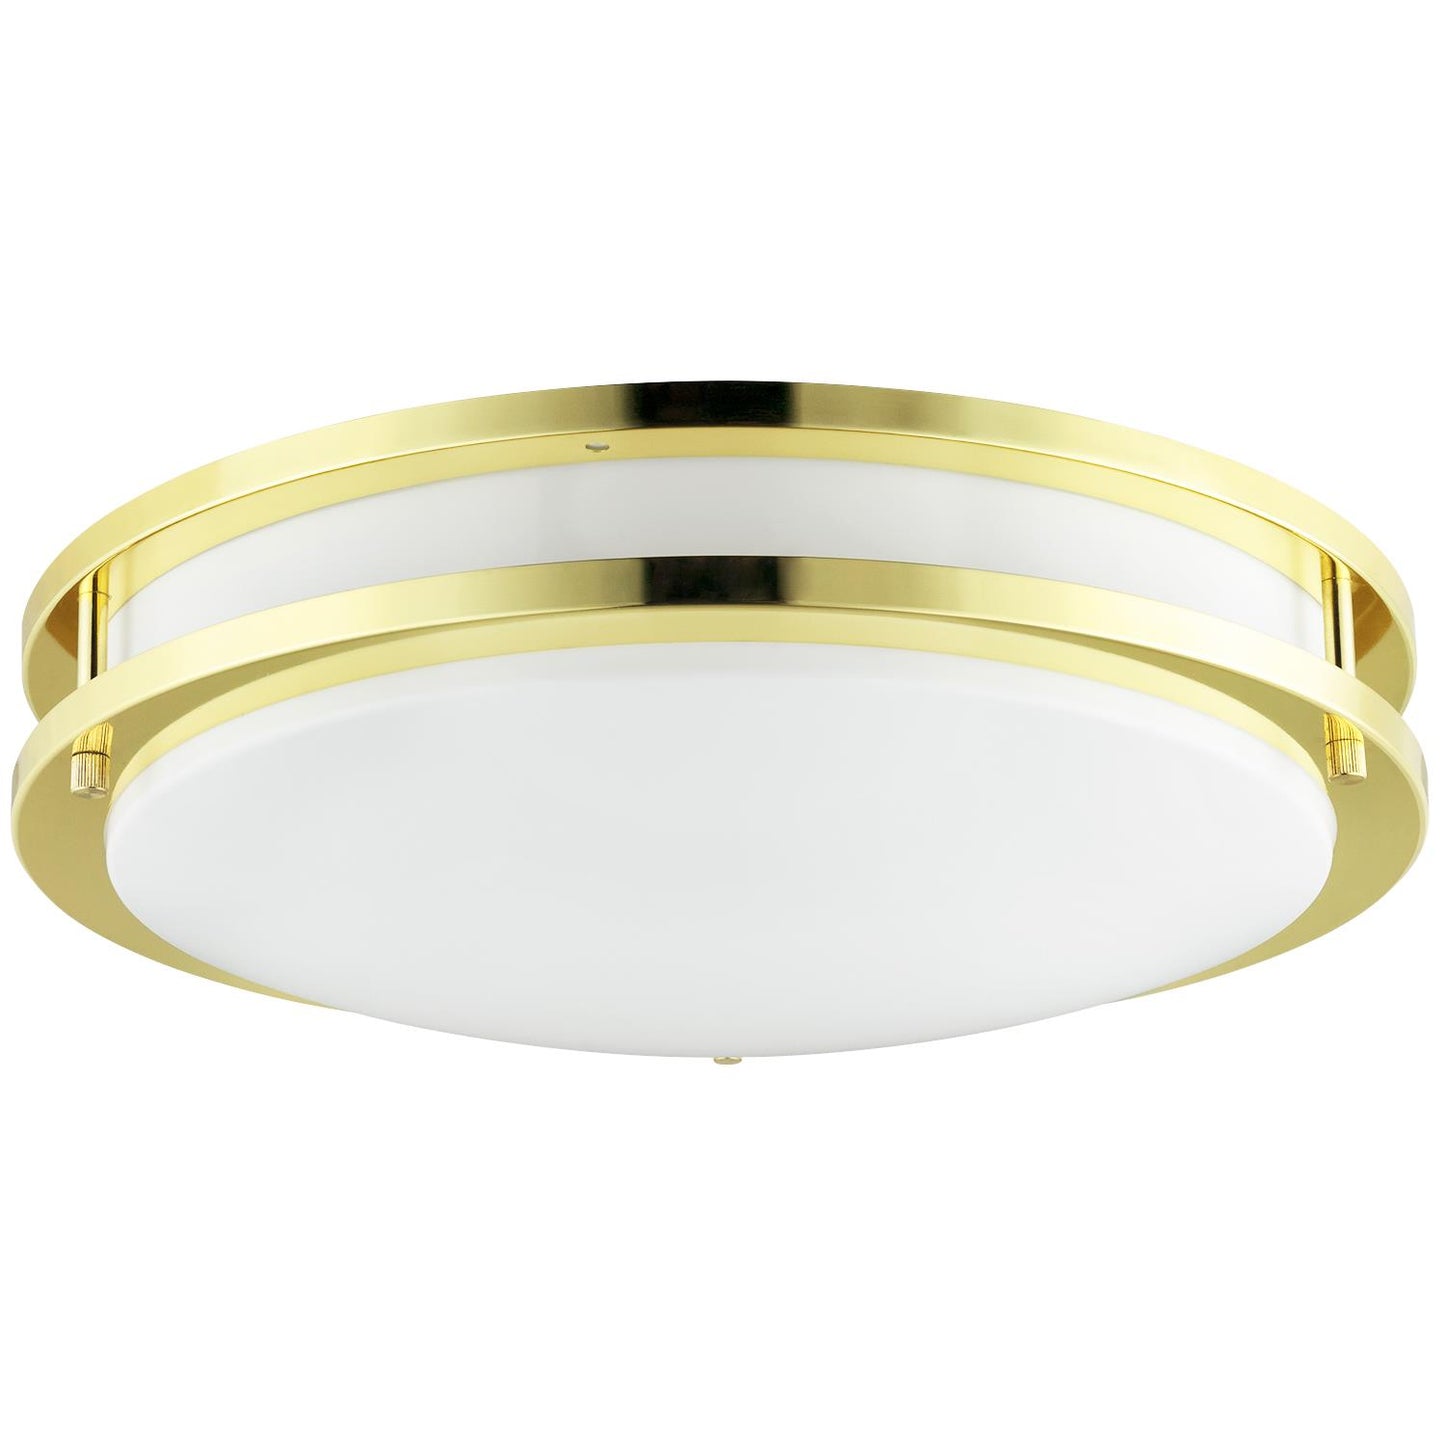 Sunlite 45571 12-Inch Fluorescent Double Band Trim Flush Mount Light Fixture, Max 23 Wattage (Bulb Included), 1600 Lumens, 2700K Soft White, Twist & Lock GU24 Base, 120V, UL Listed, Polished Brass